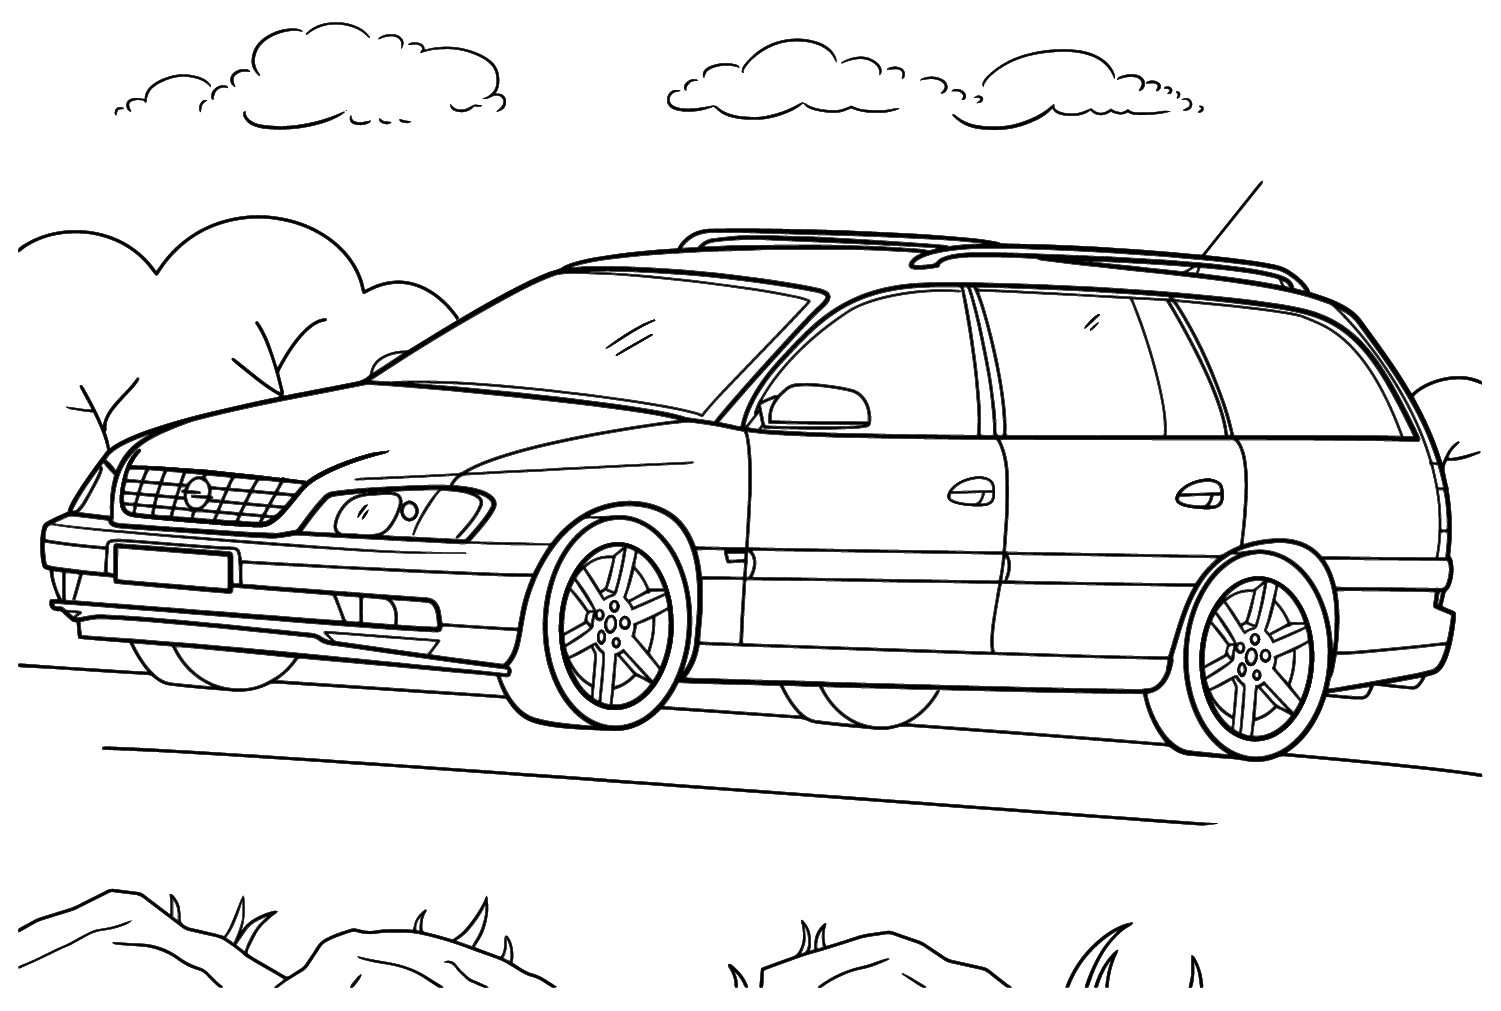 Opel Omega Caravan Coloring Page from Opel